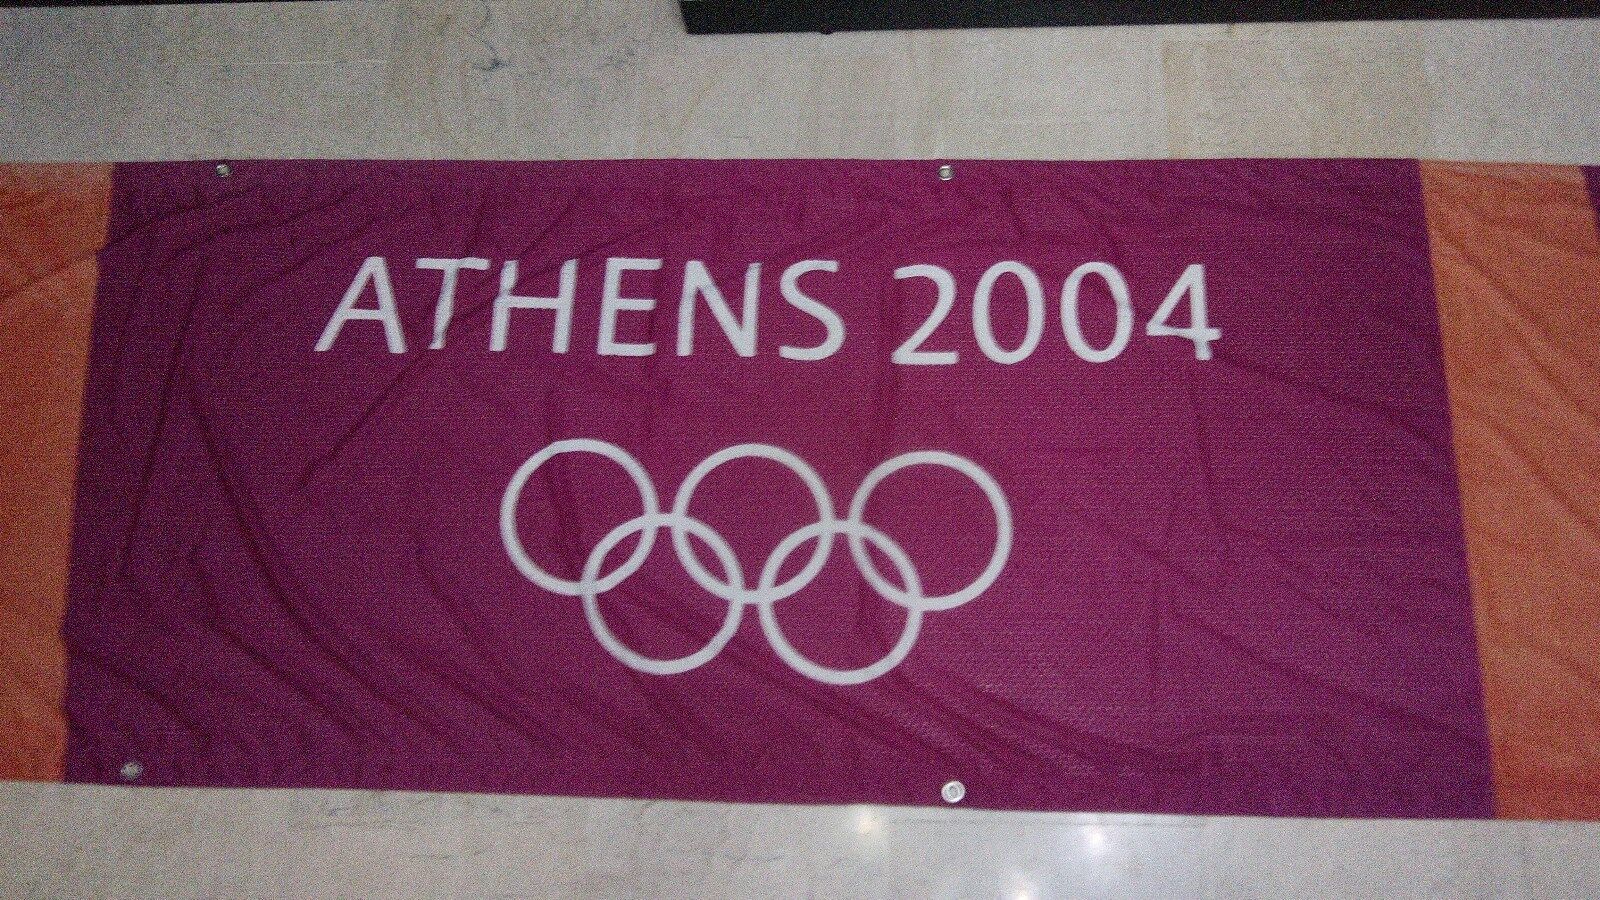 ATHENS 2004 VERY RARE FABRIC(not quite a banner or a flag but a very big fabric)